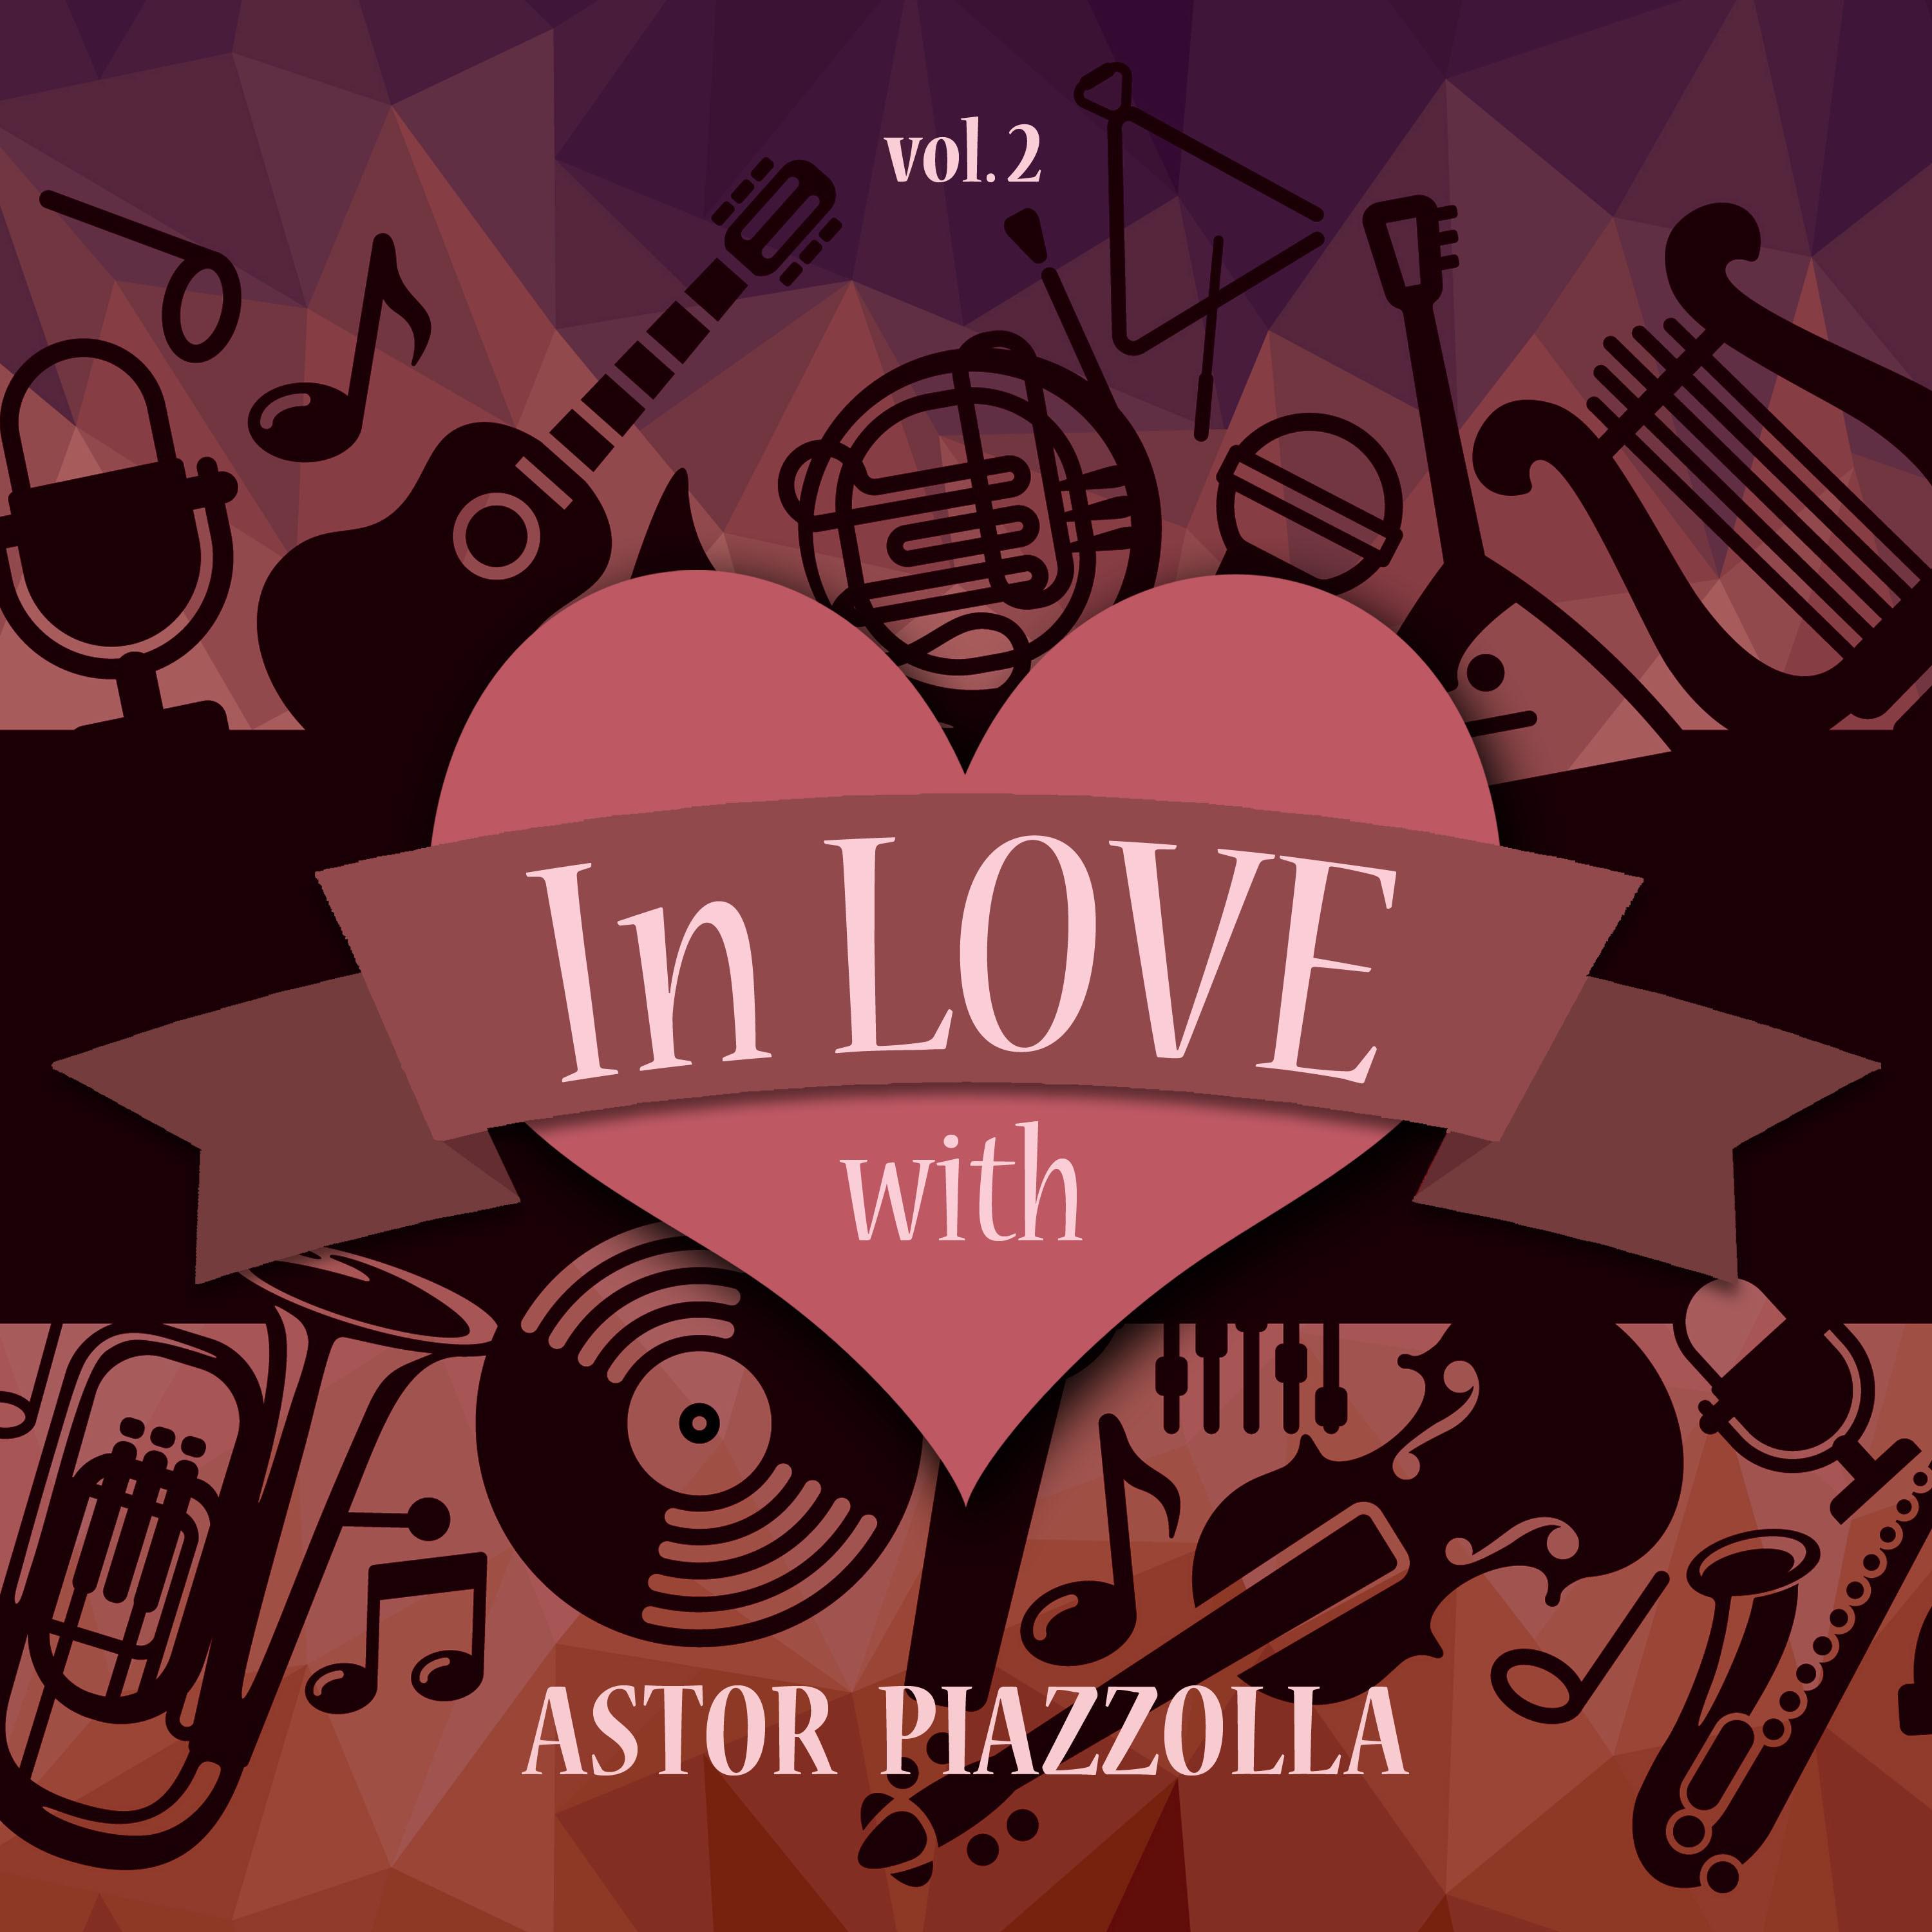 In Love with Astor Piazzolla, Vol. 2